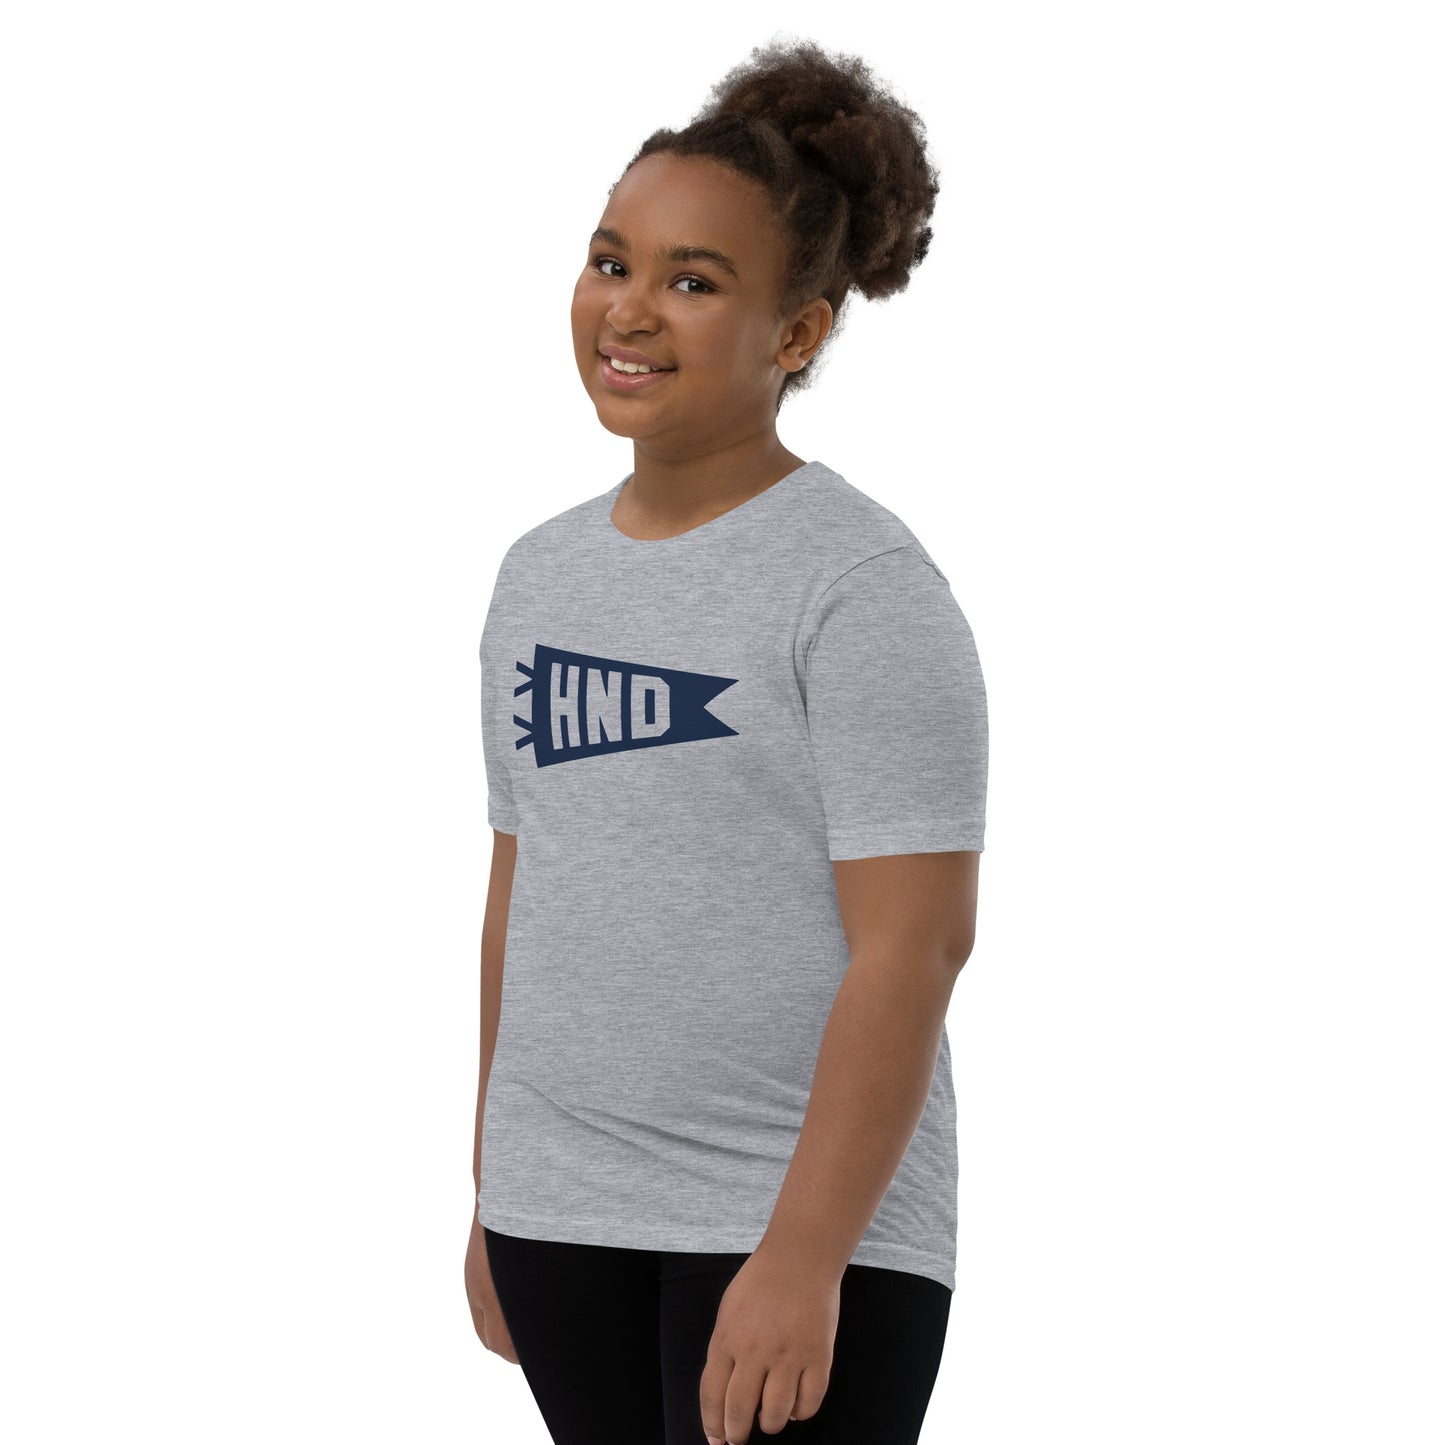 Kid's Airport Code Tee - Navy Blue Graphic • HND Tokyo • YHM Designs - Image 04